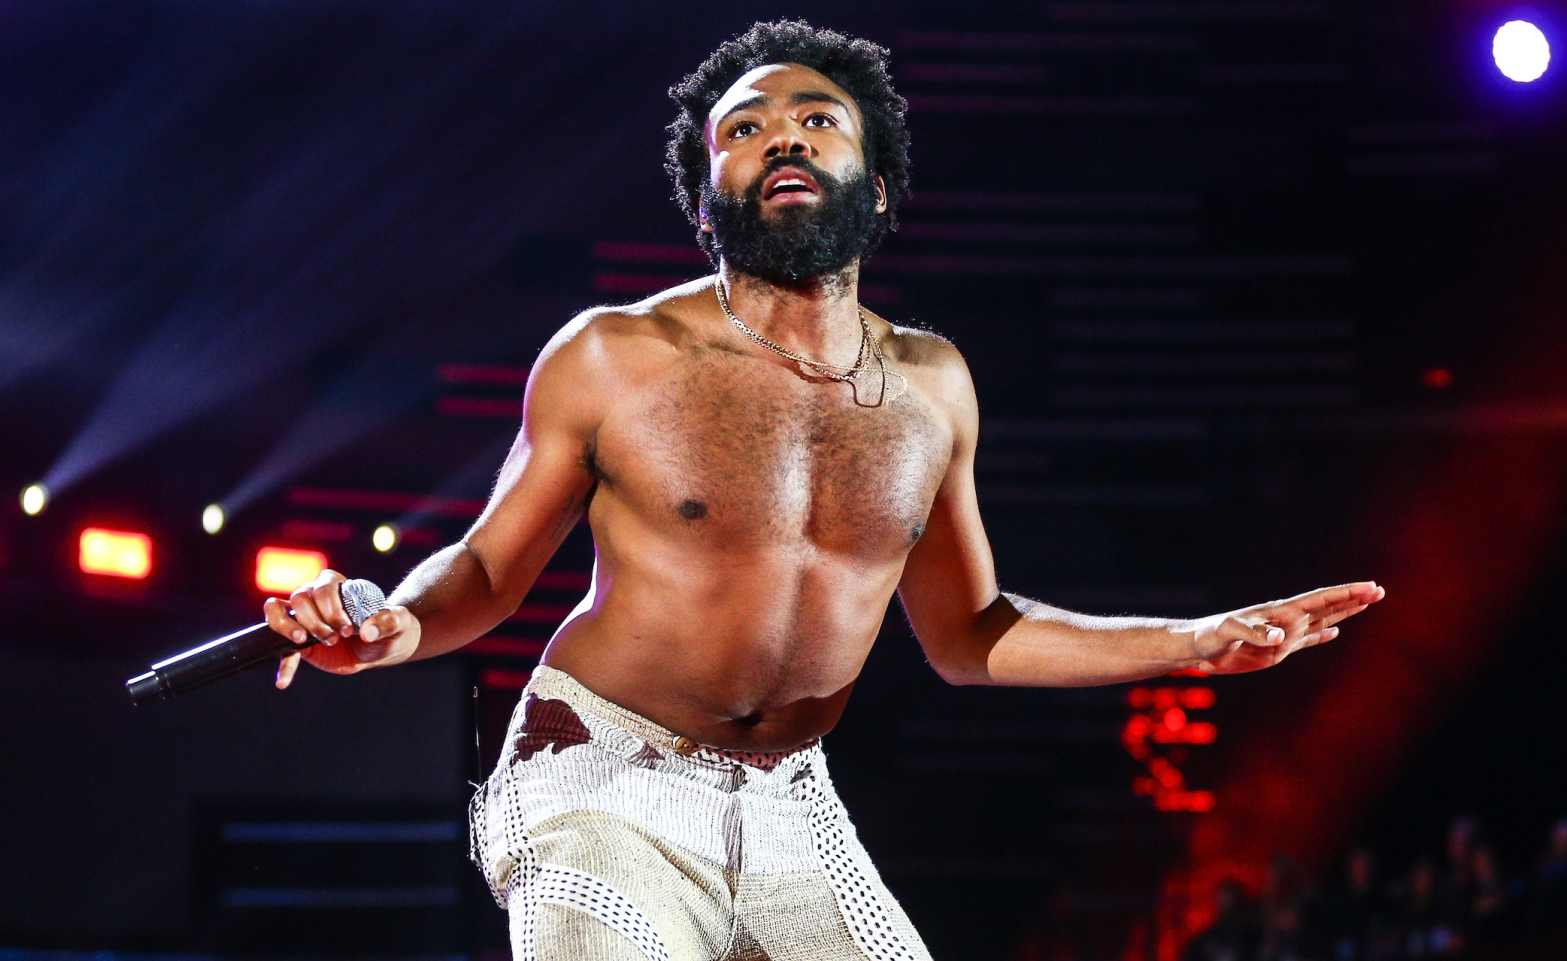 Childish Gambino Adds Another Date To His Aus Tour, Increasing Your Chances Of Nabbing Tickets